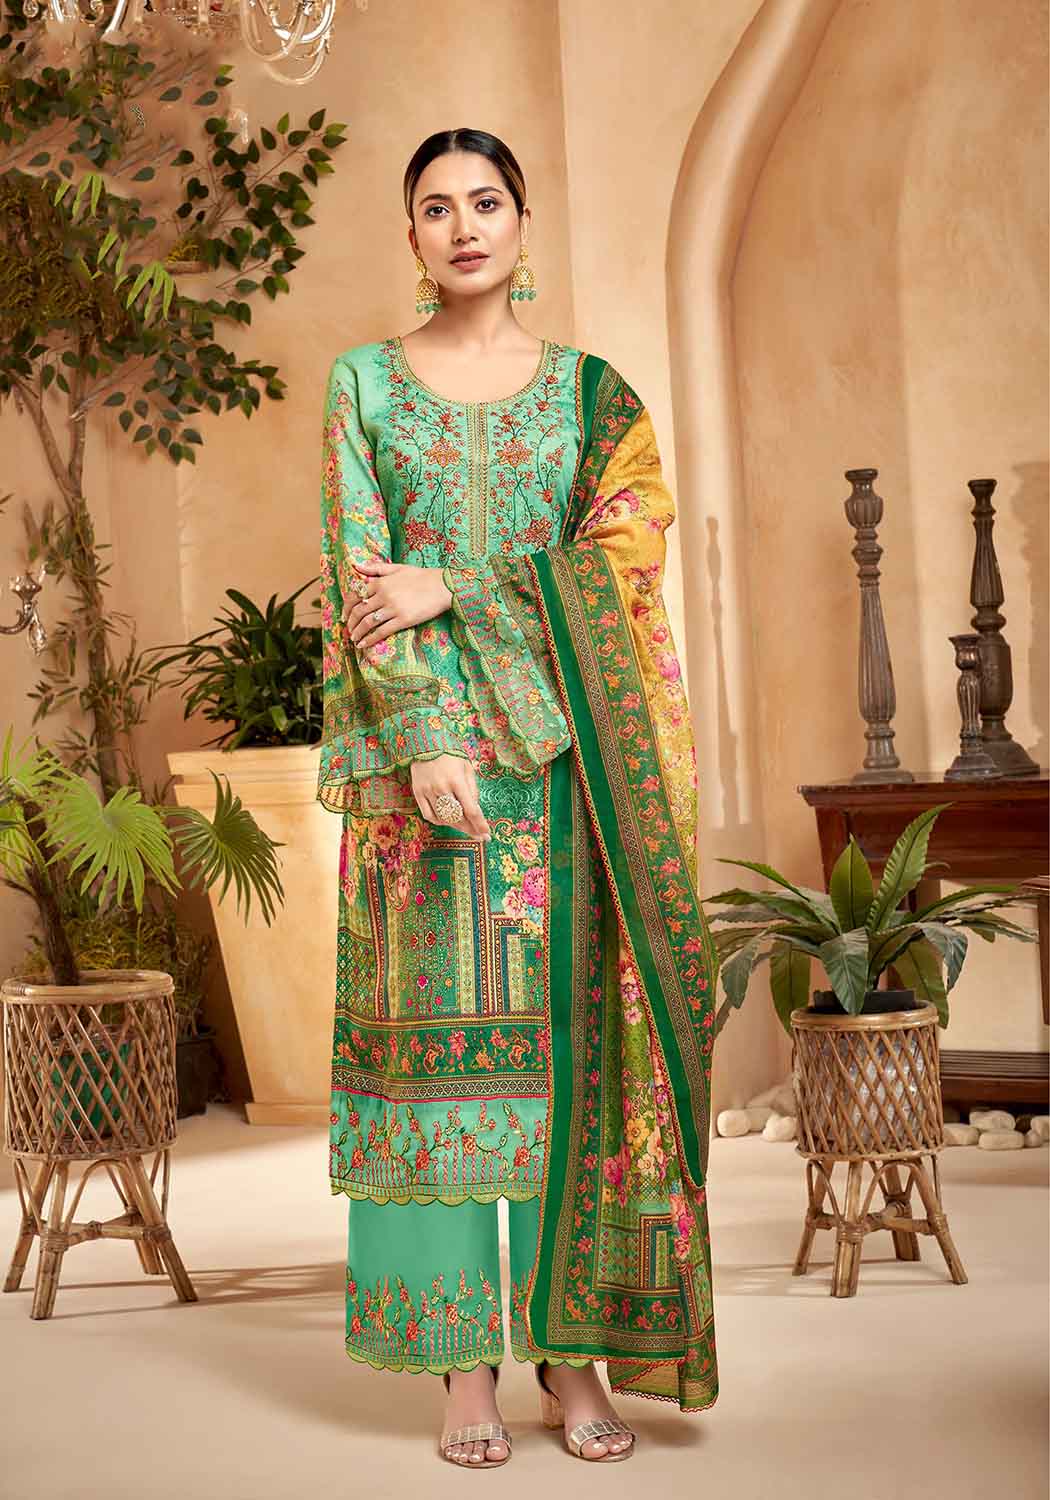 Unstitched Pakistani Print Cotton Suit Material with Embroidery Green